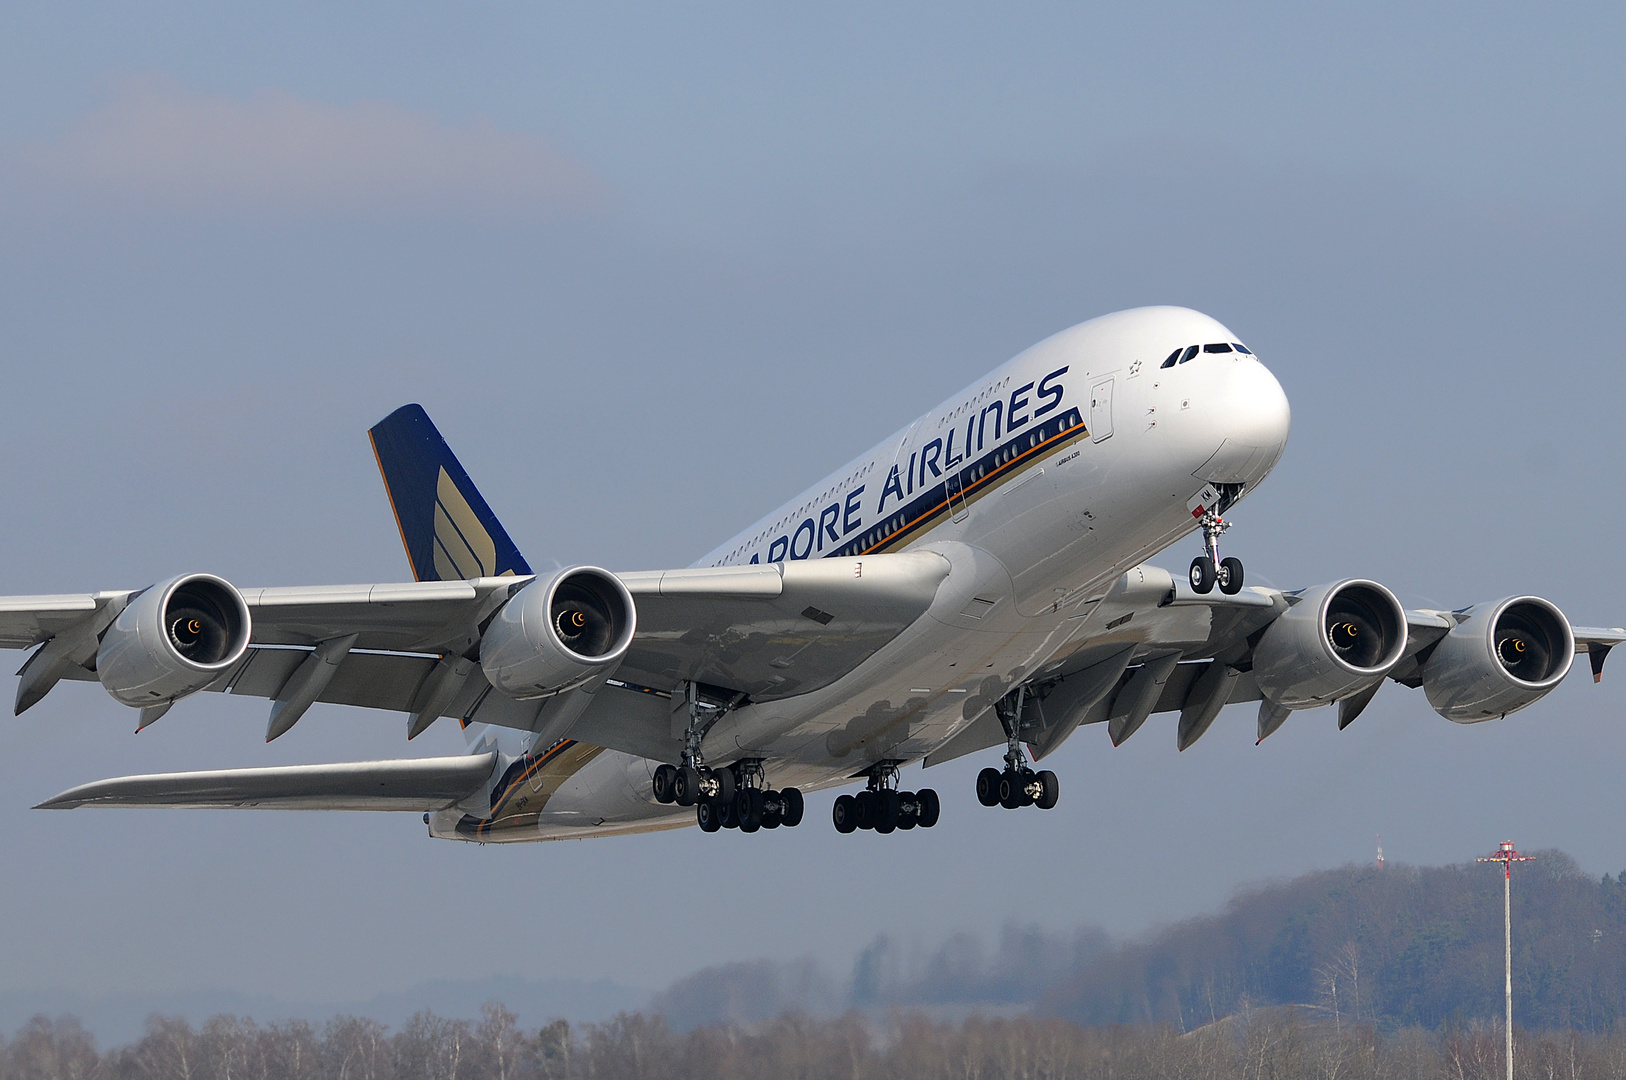 Singapore Airlines Airbus A380-841 